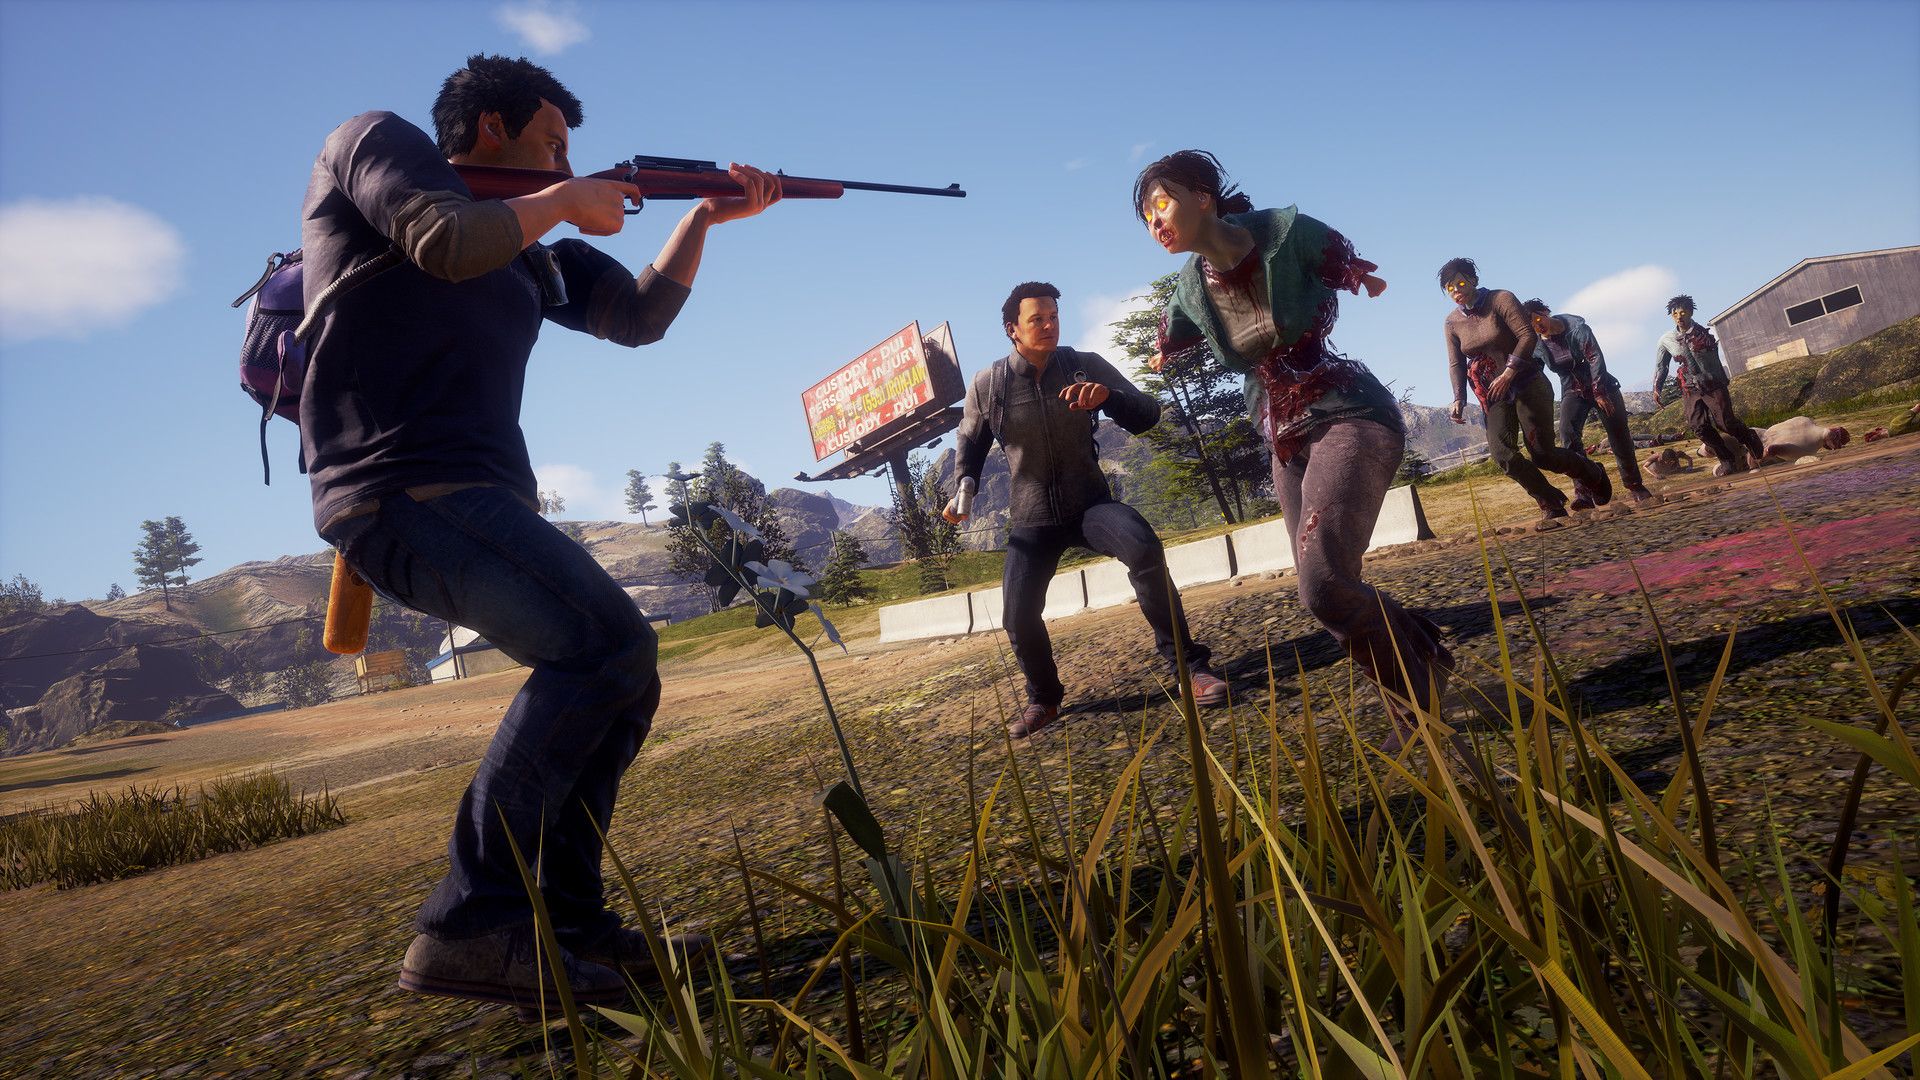 State of Decay 2 update includes Halloween masks, quality of life